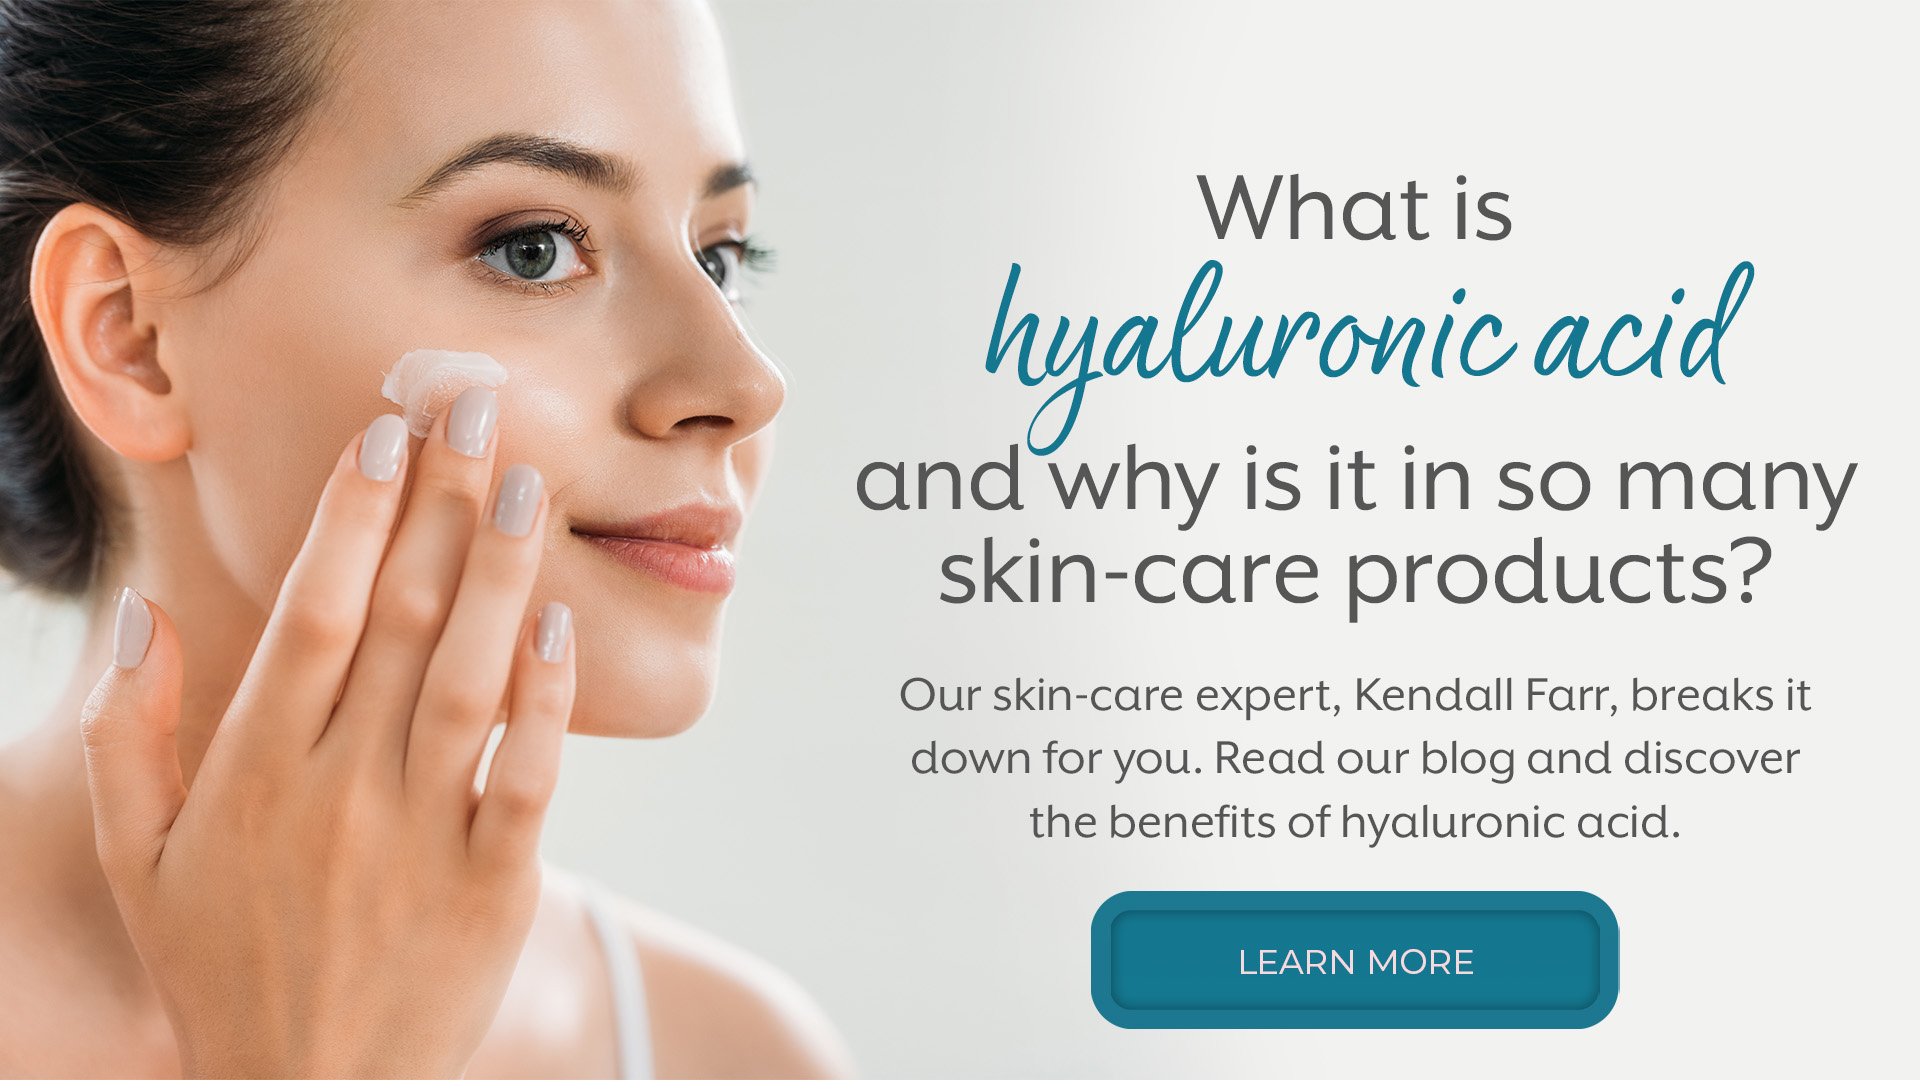 What is hyaluronic acid and why is it in so many skin-care products? Our skin-care expert, Kendall Farr, breaks it down for you. Read our blog and discover the benefits of hyaluronic acid.